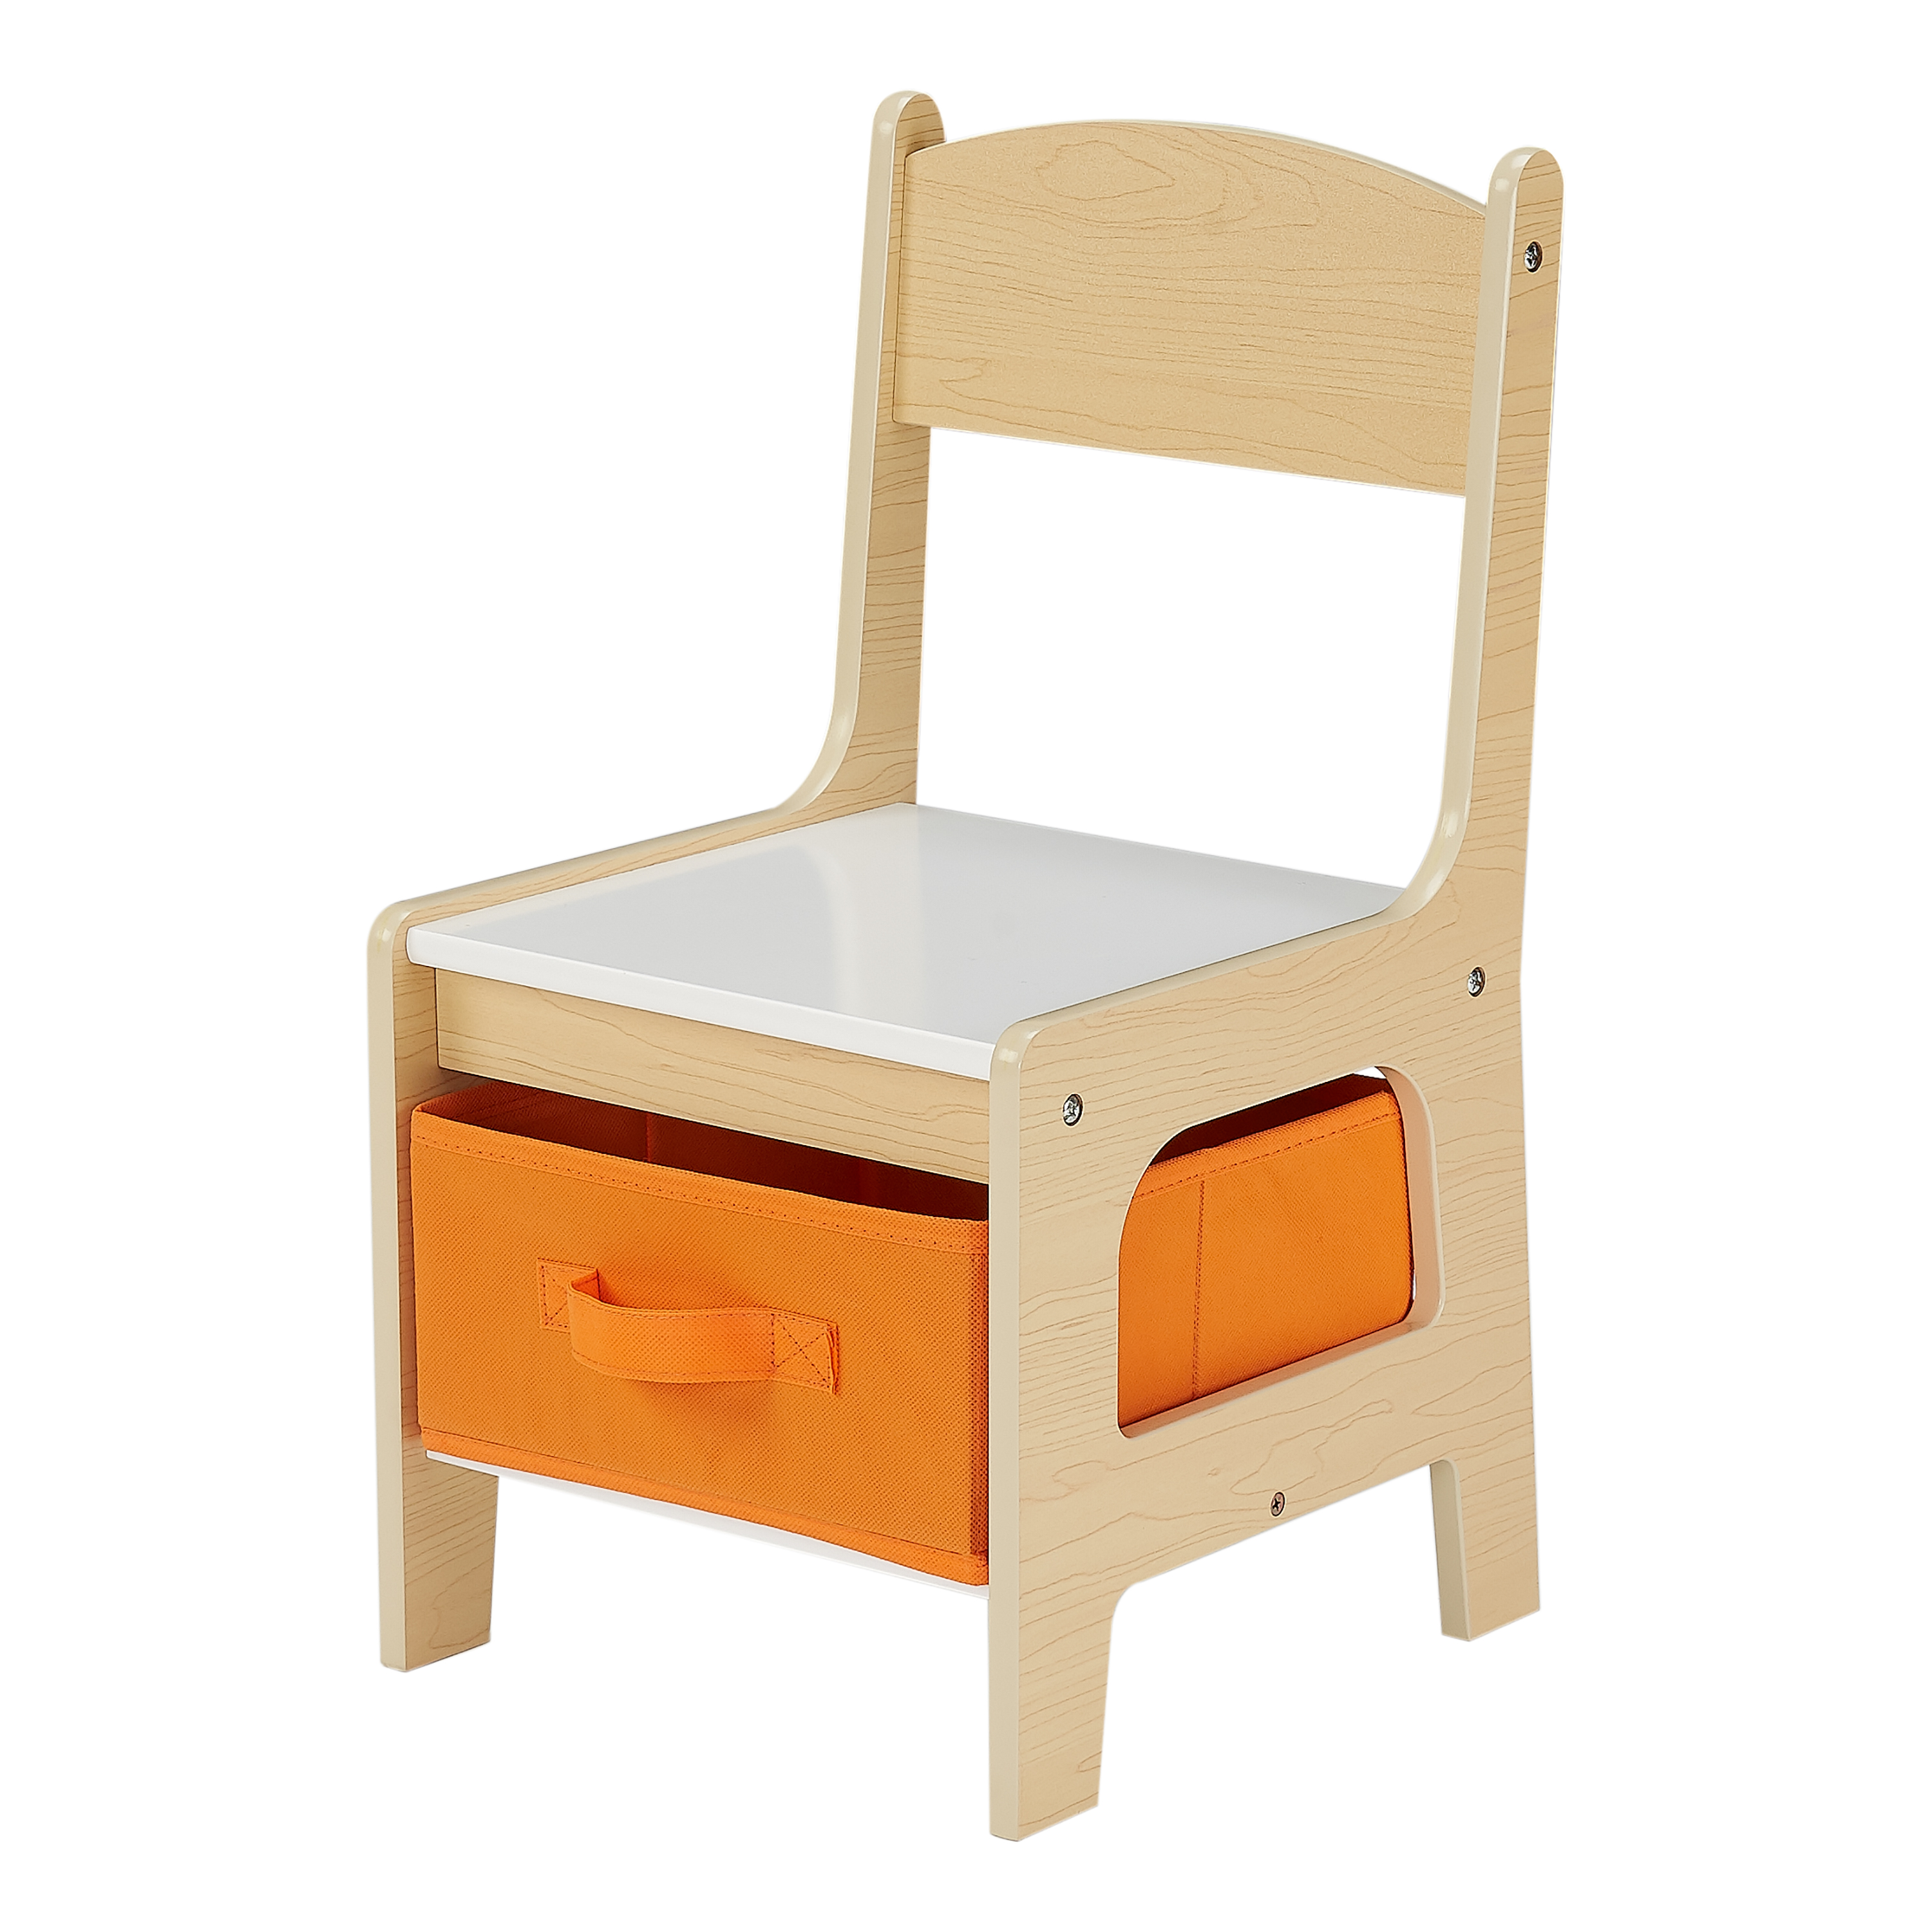 Senda Kids 3 Piece Wooden Storage Table and Chairs Set, White and Natural, Ages 3-7 - image 5 of 8